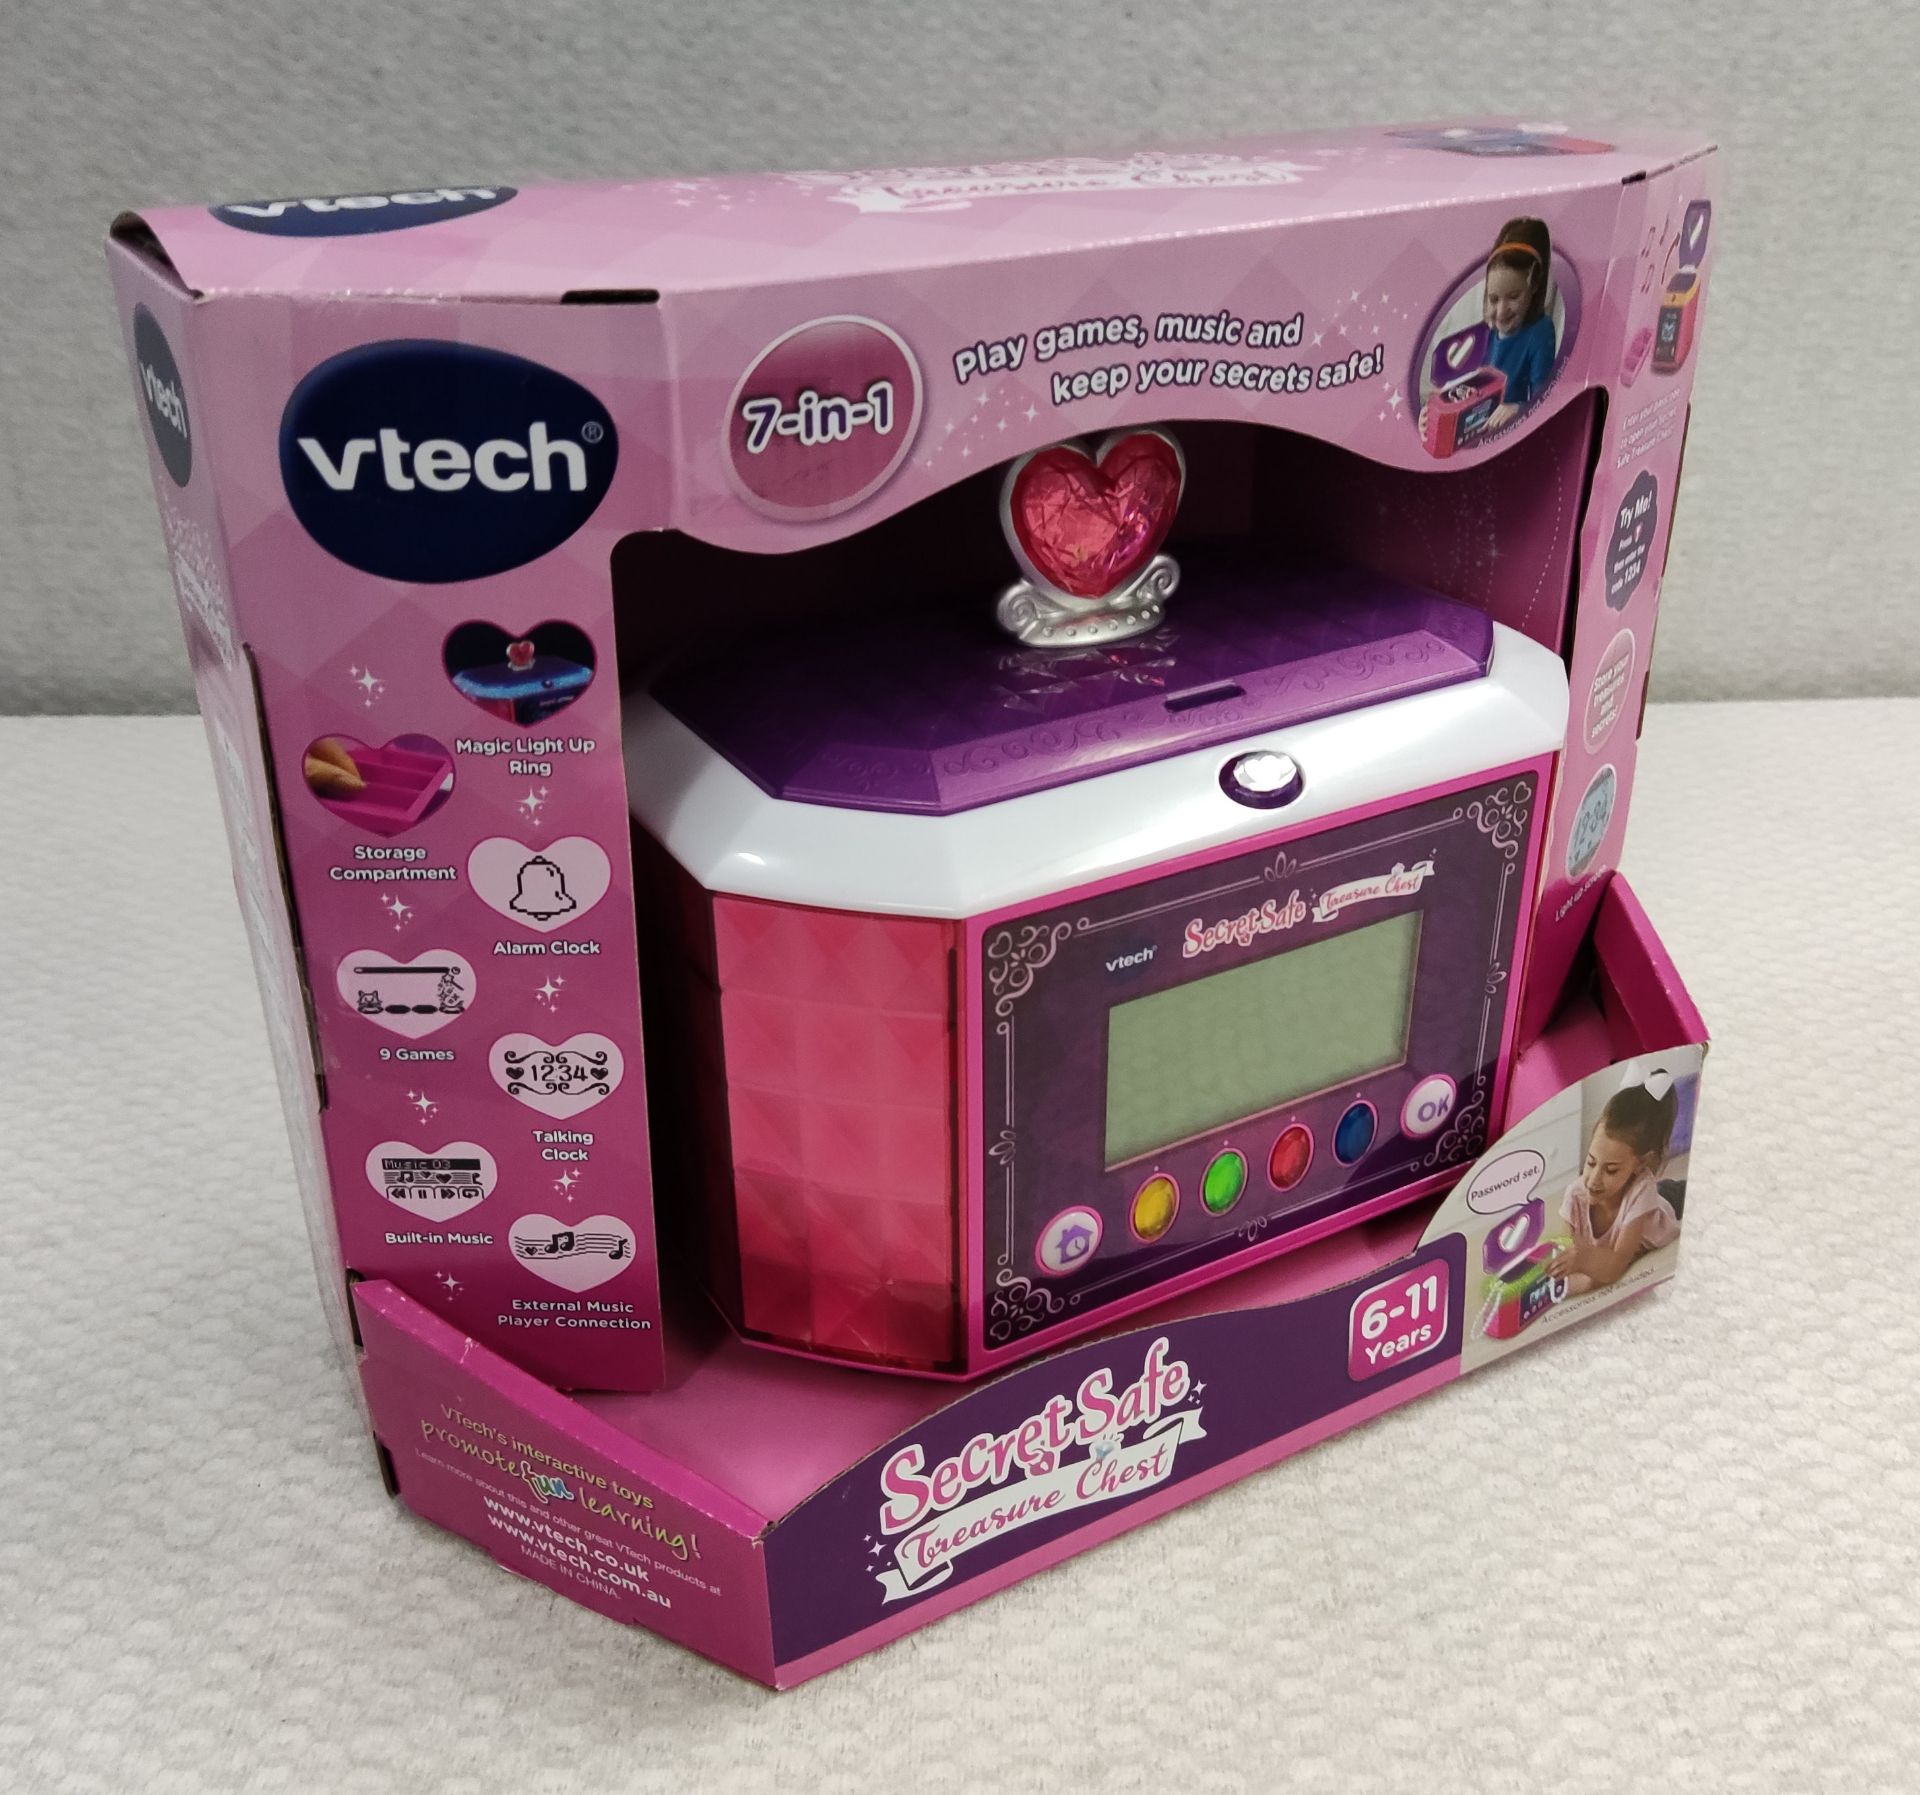 1 x Vtech 7-in-1 Secret Safe Treasure Chest - New/Boxed - Image 7 of 7